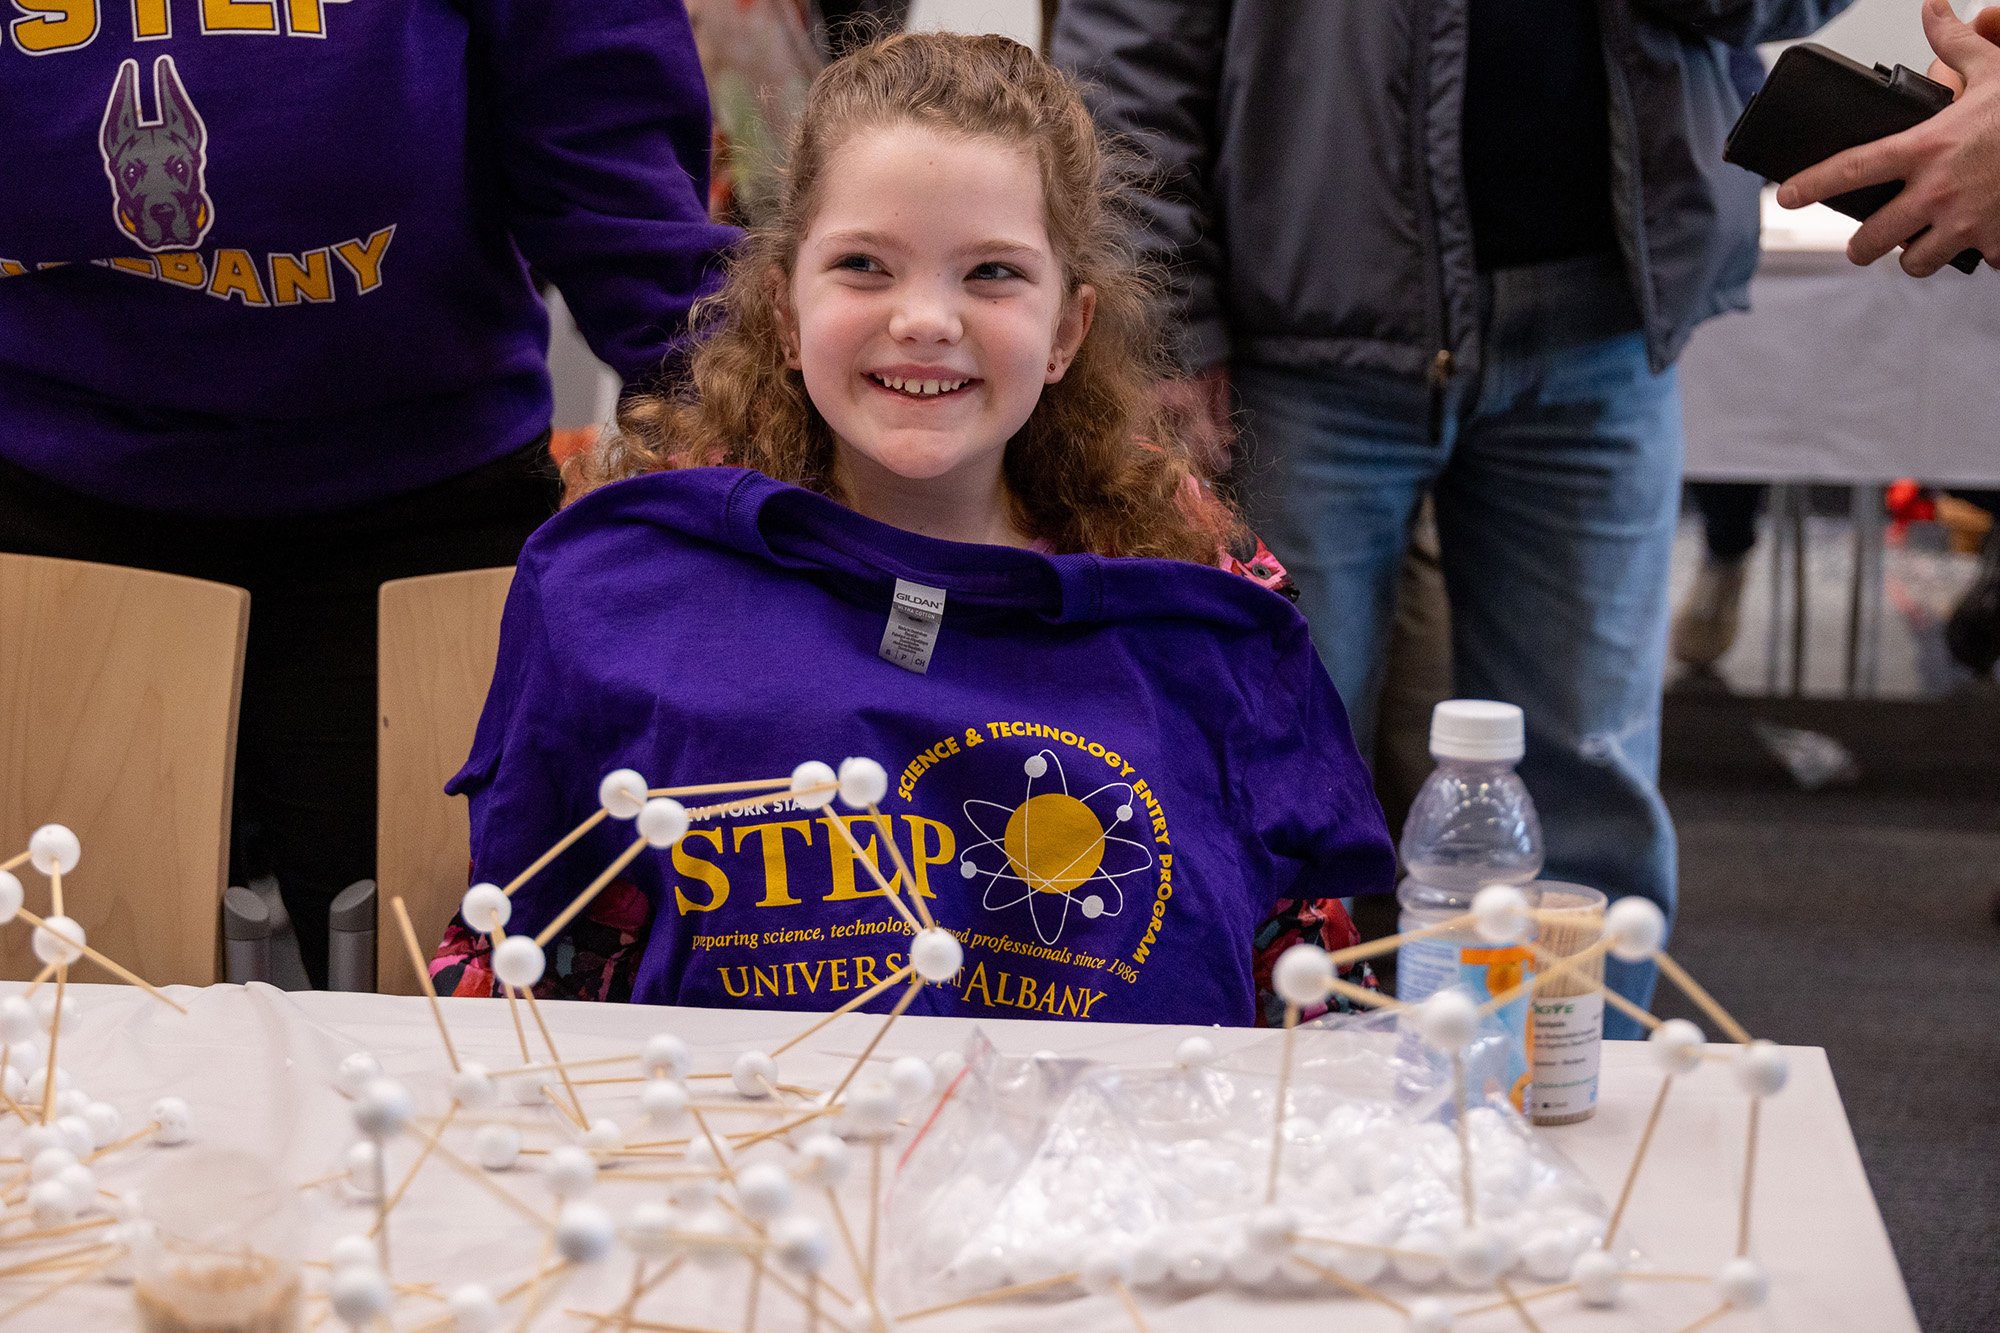 A young girl smiles with her new t-shirt at UAlbany's STEM & Nanotechnology Family Day at ETEC.